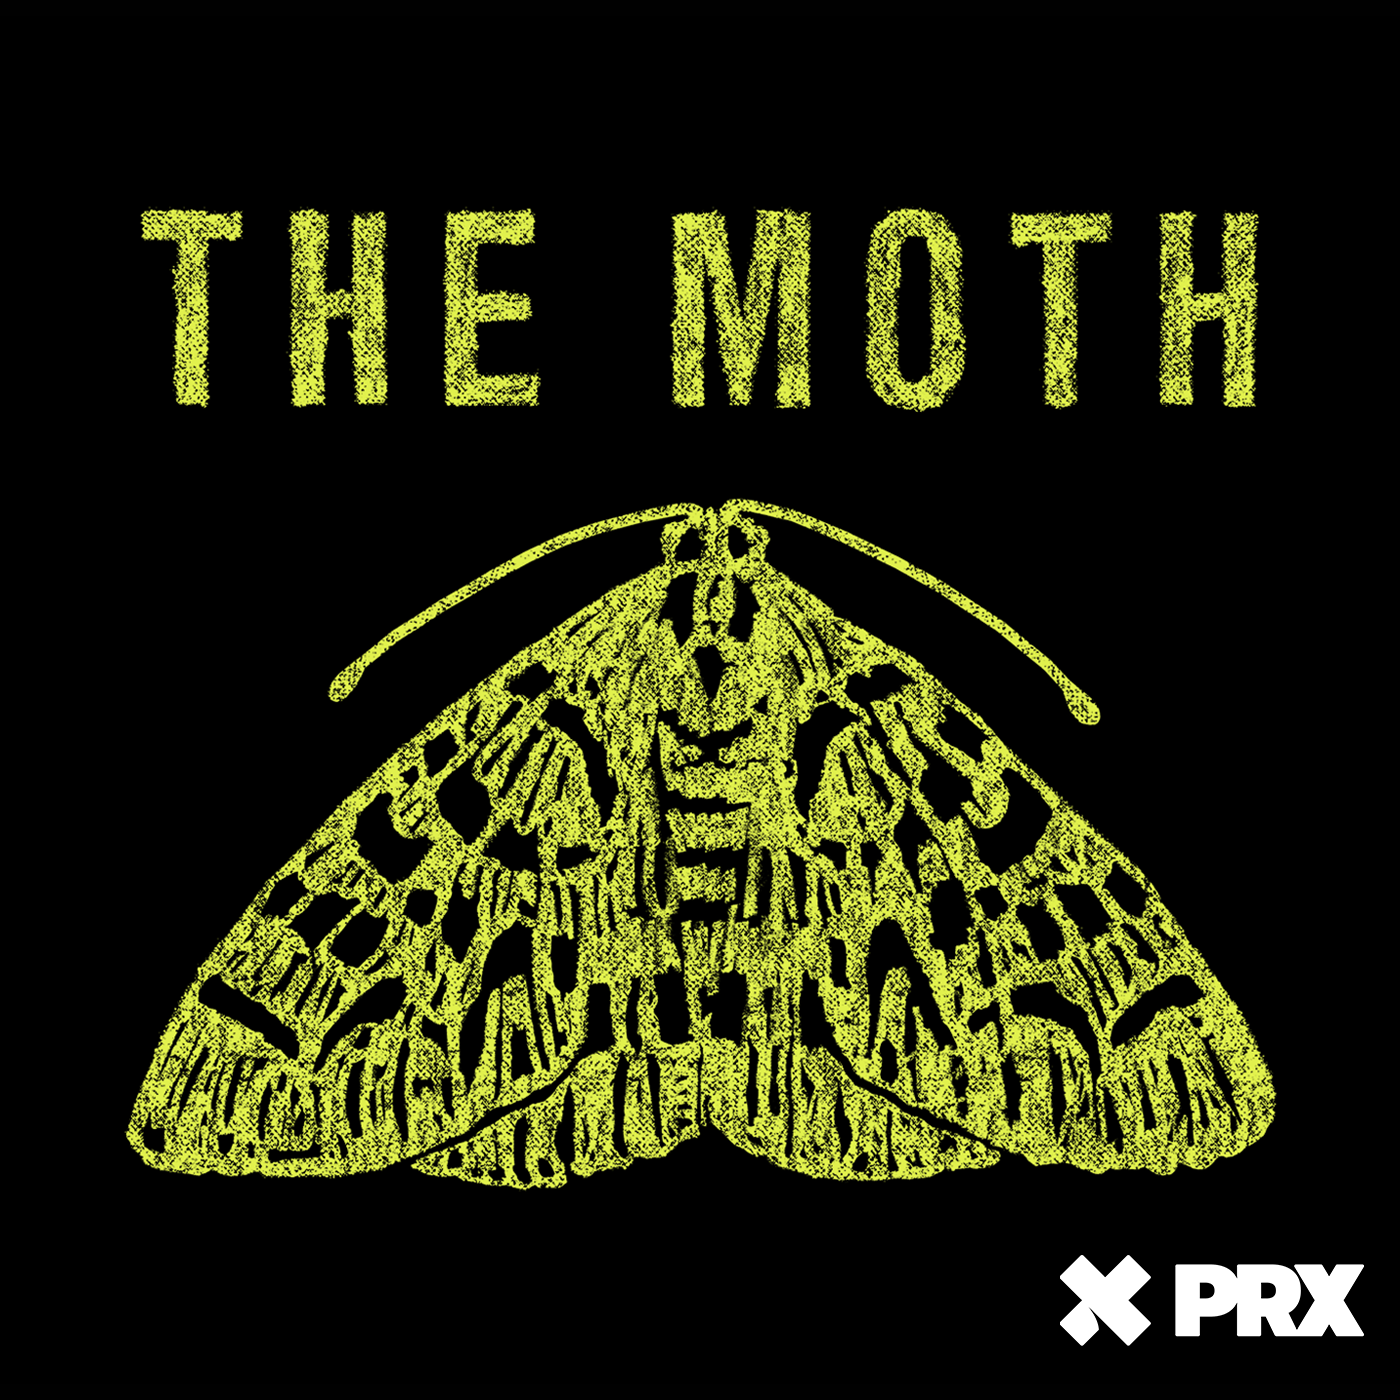 The Moth Radio Hour: More Kindness of Strangers